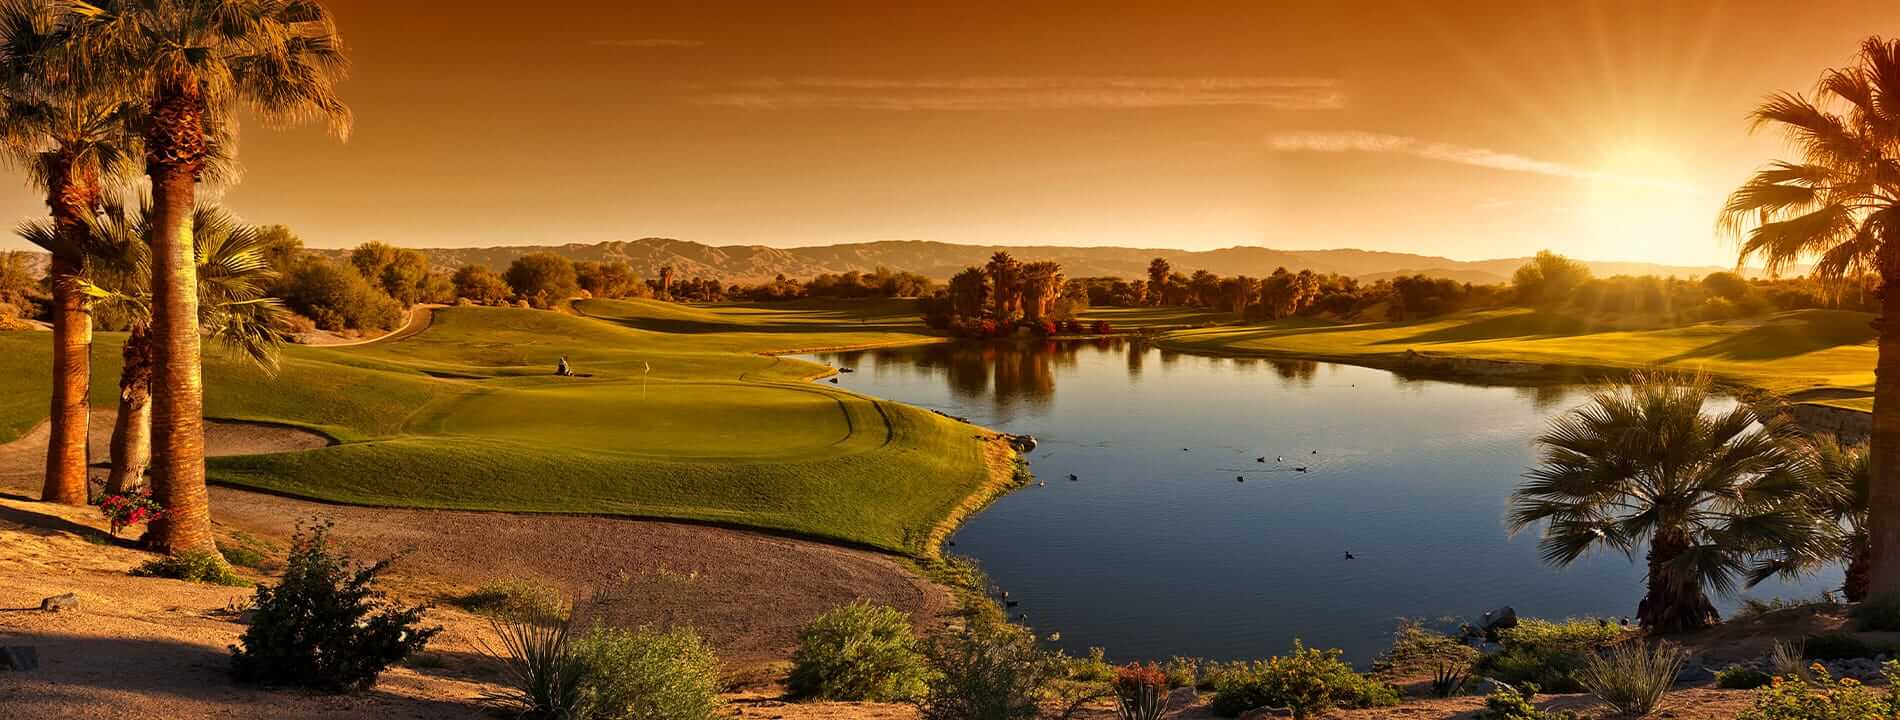 scenic view of golf course and lake at sunset